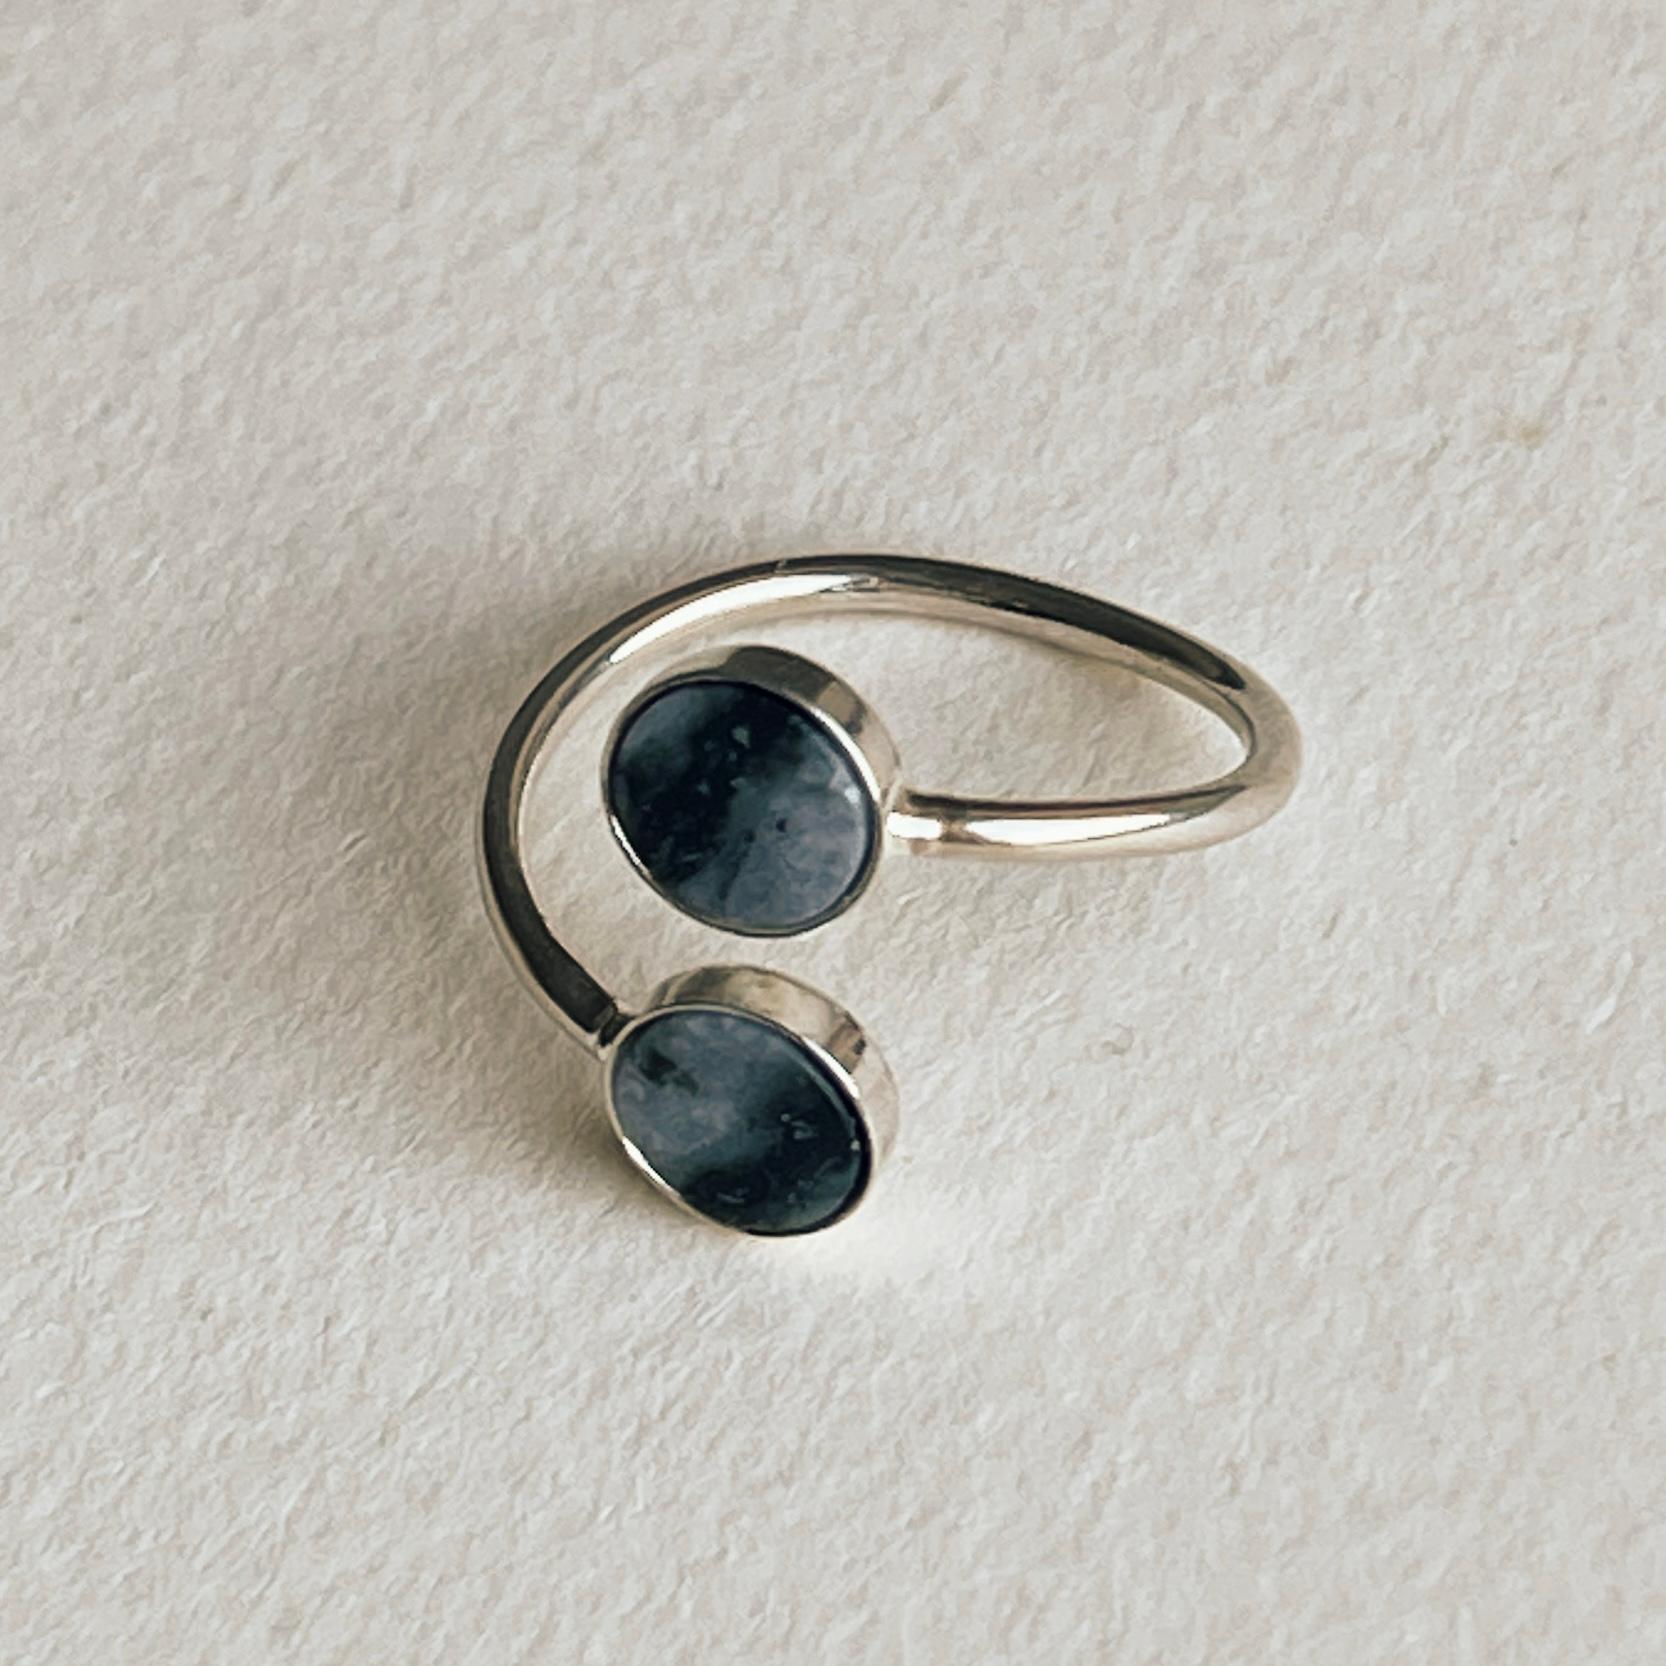 Elevate your style with our sterling silver ring featuring stunning dolomite Picasso stones. This adjustable ring offers both timeless elegance and personalized comfort for a truly unique accessory.
The ring is made of sterling silver. 
The diameter